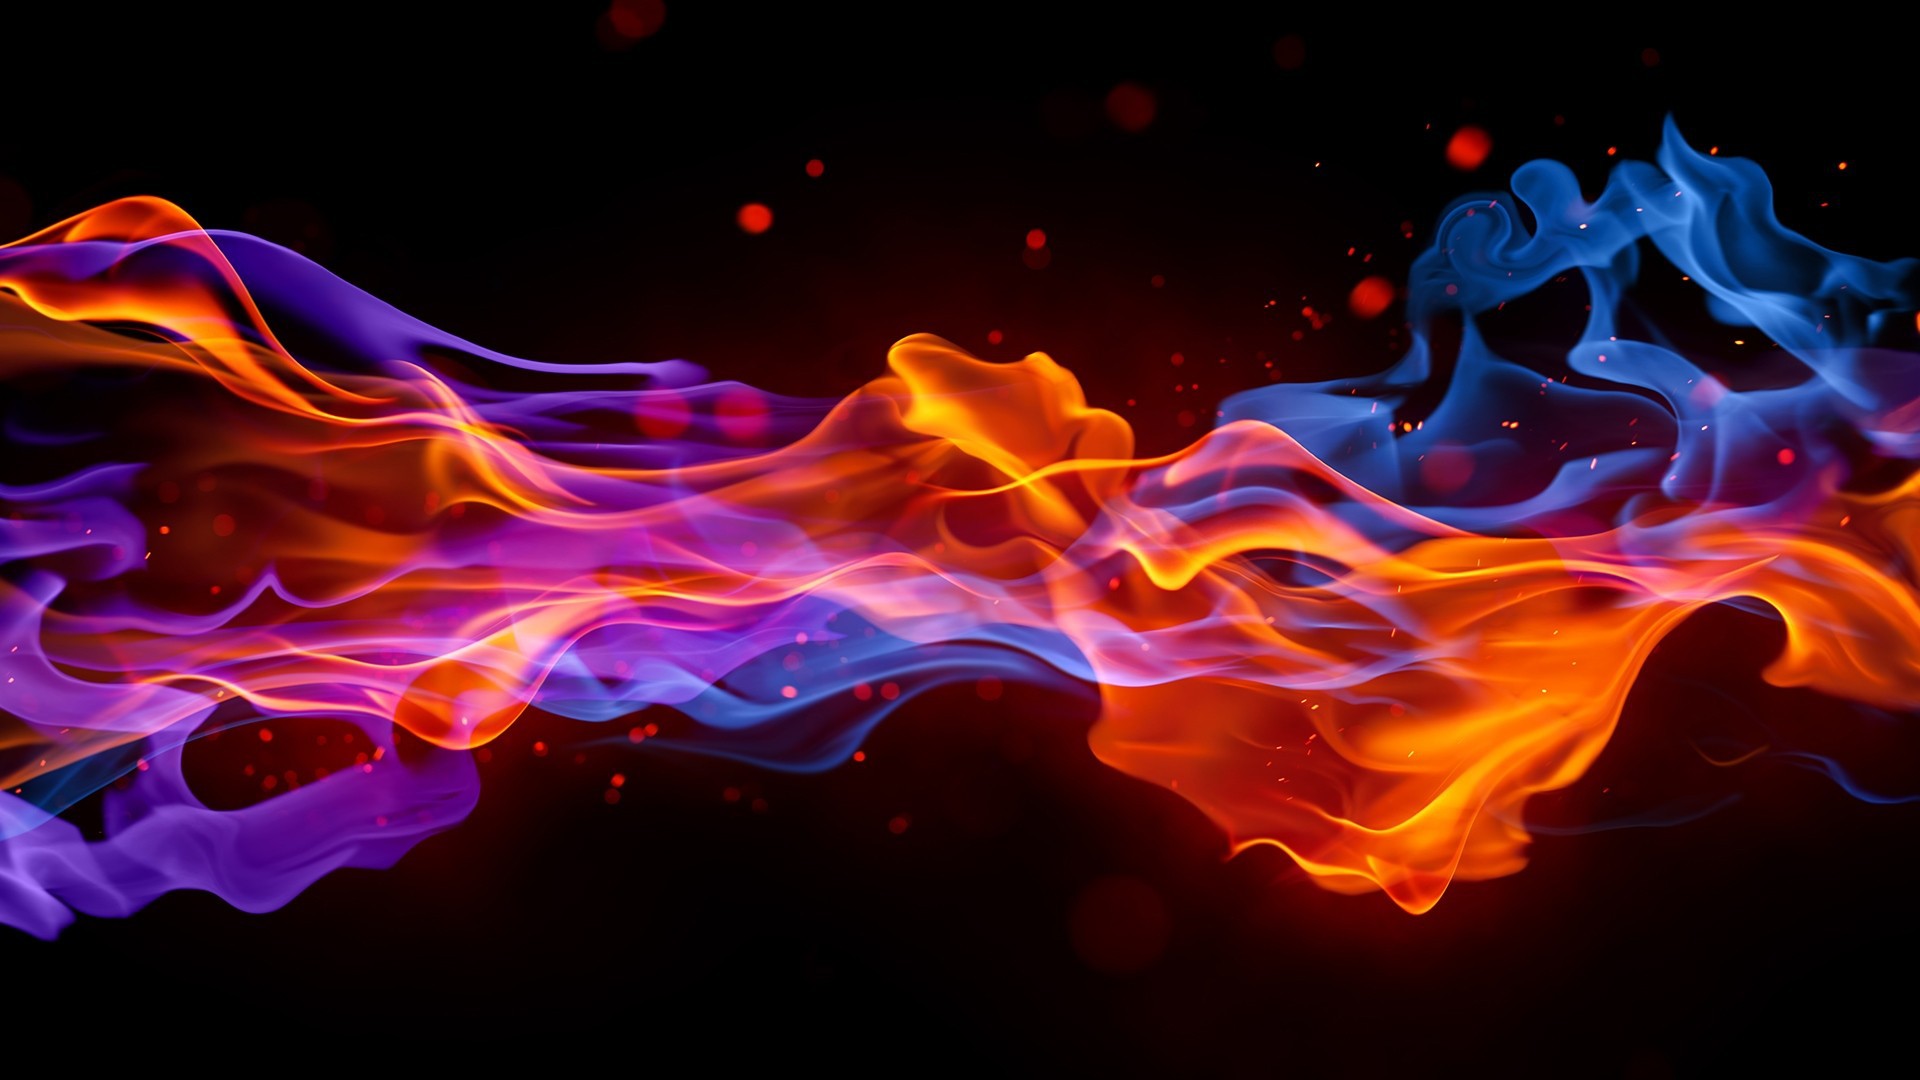 Multicolored abstraction smoke wallpapers and images - wallpapers ...